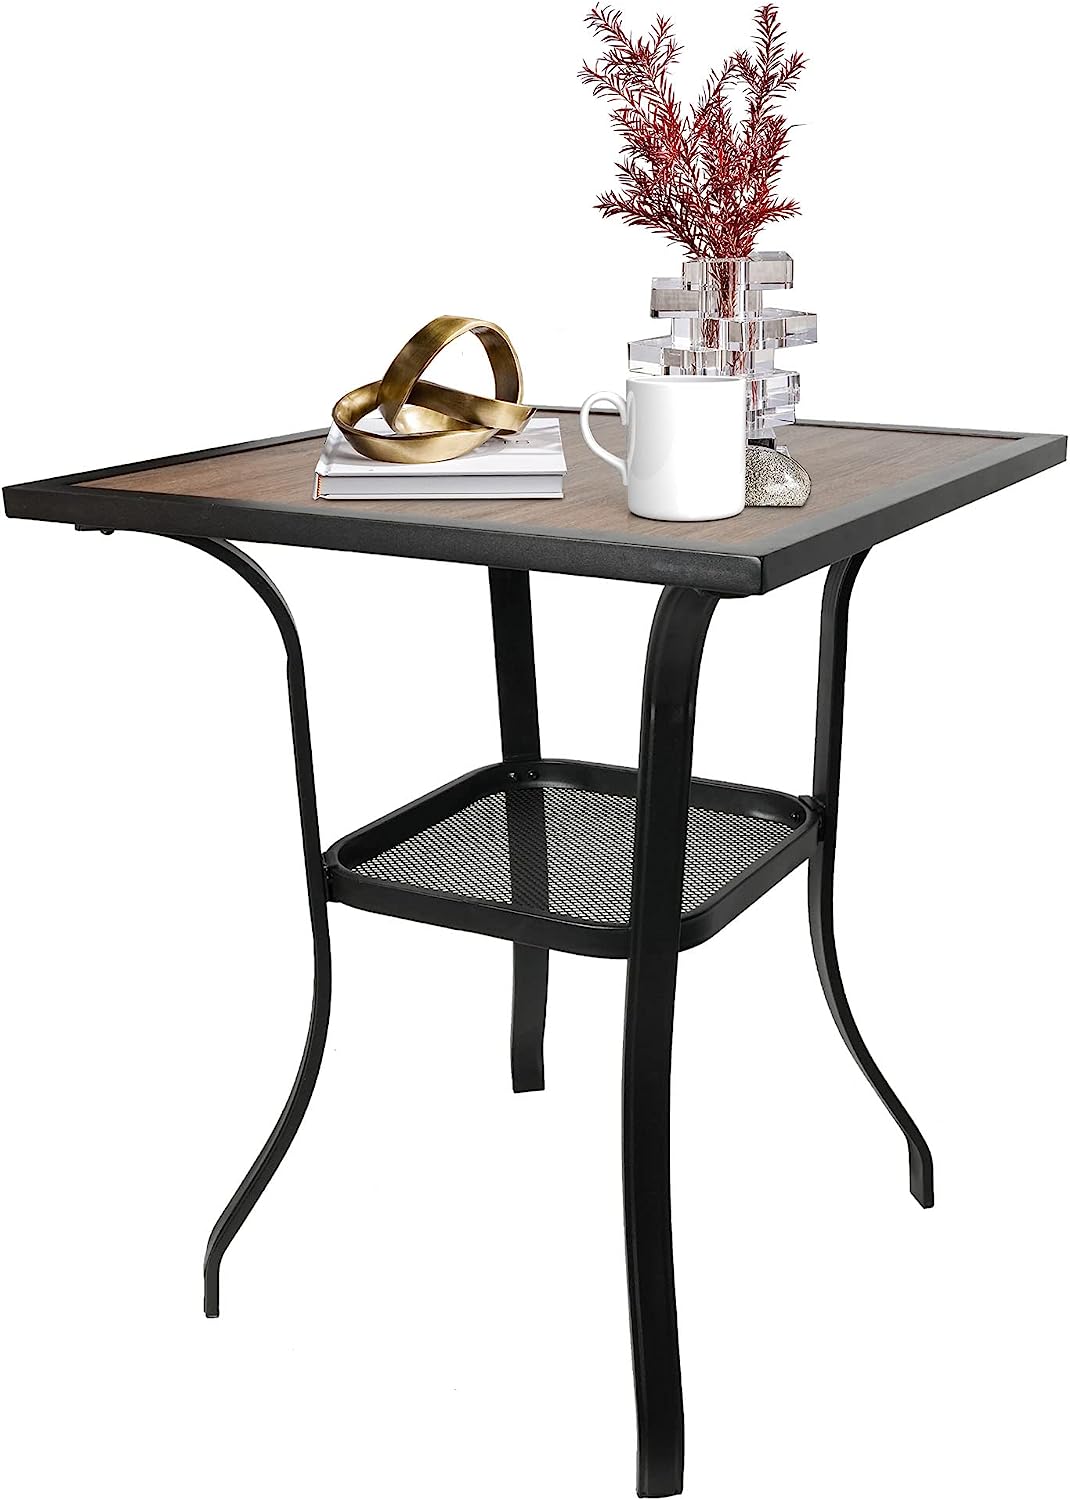 (Out of Stock) Patio Square Bar Table for Garden Backyard with Storage Rack & Wooden-Like Table Top